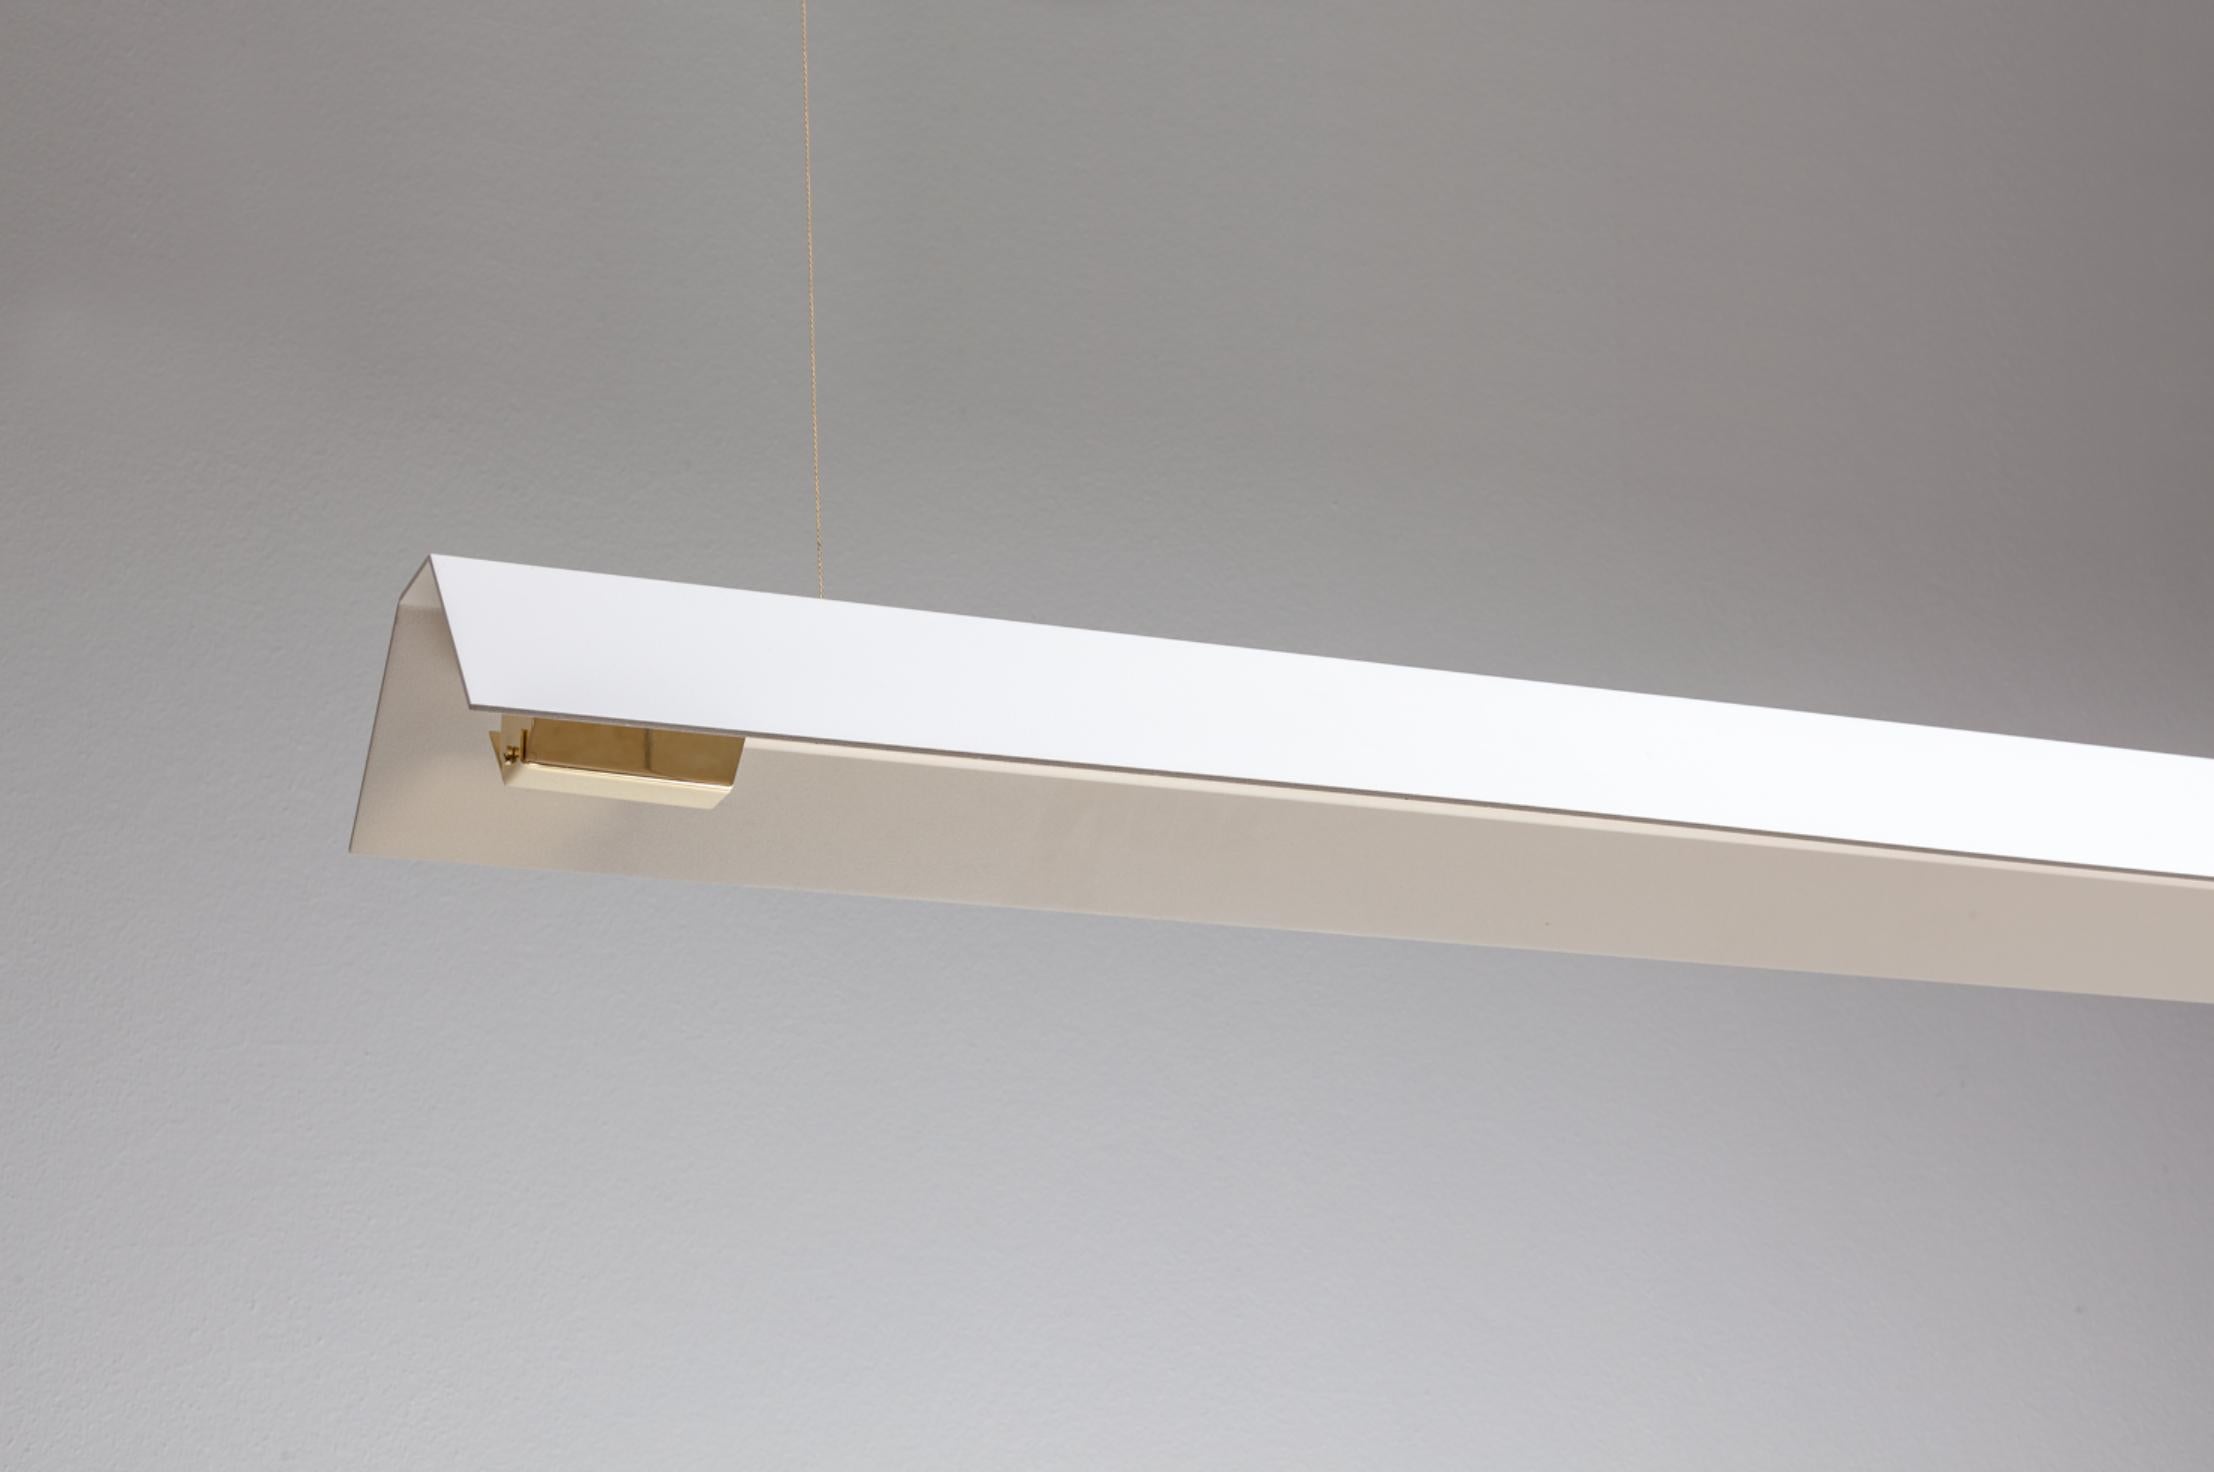 Large Misalliance Ex pure white suspended light by Lexavala
Dimensions: D 16 x W 130 x H 8 cm
Materials: powder coated shade with details made of brass or stainless steel.

There are two lenghts of socket covers, extending over the LED. Two